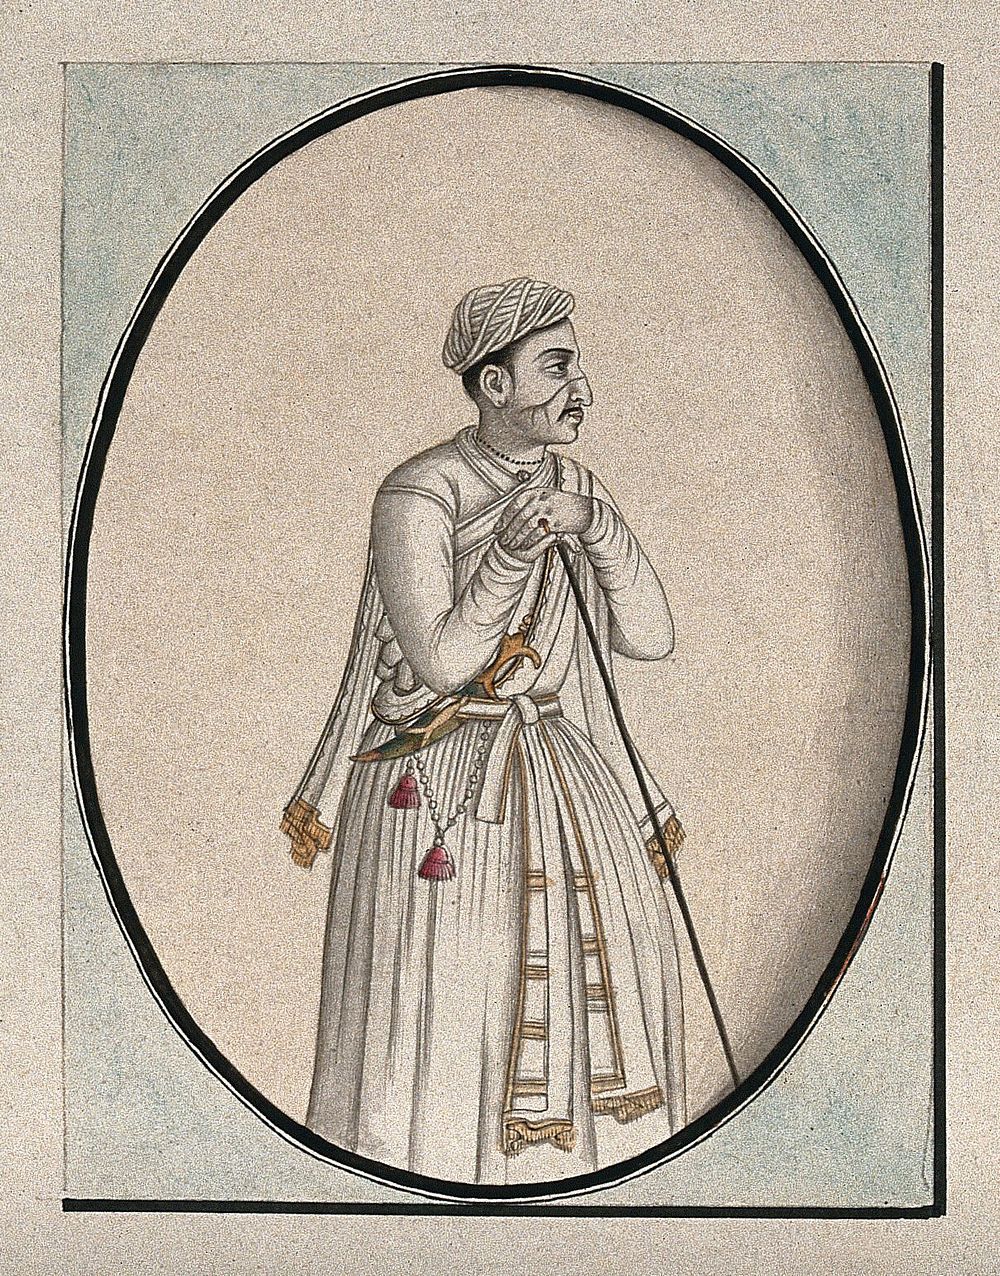 A Mughal courtier with a scar on his face, leaning on a stick. Watercolour drawing by an Indian artist.